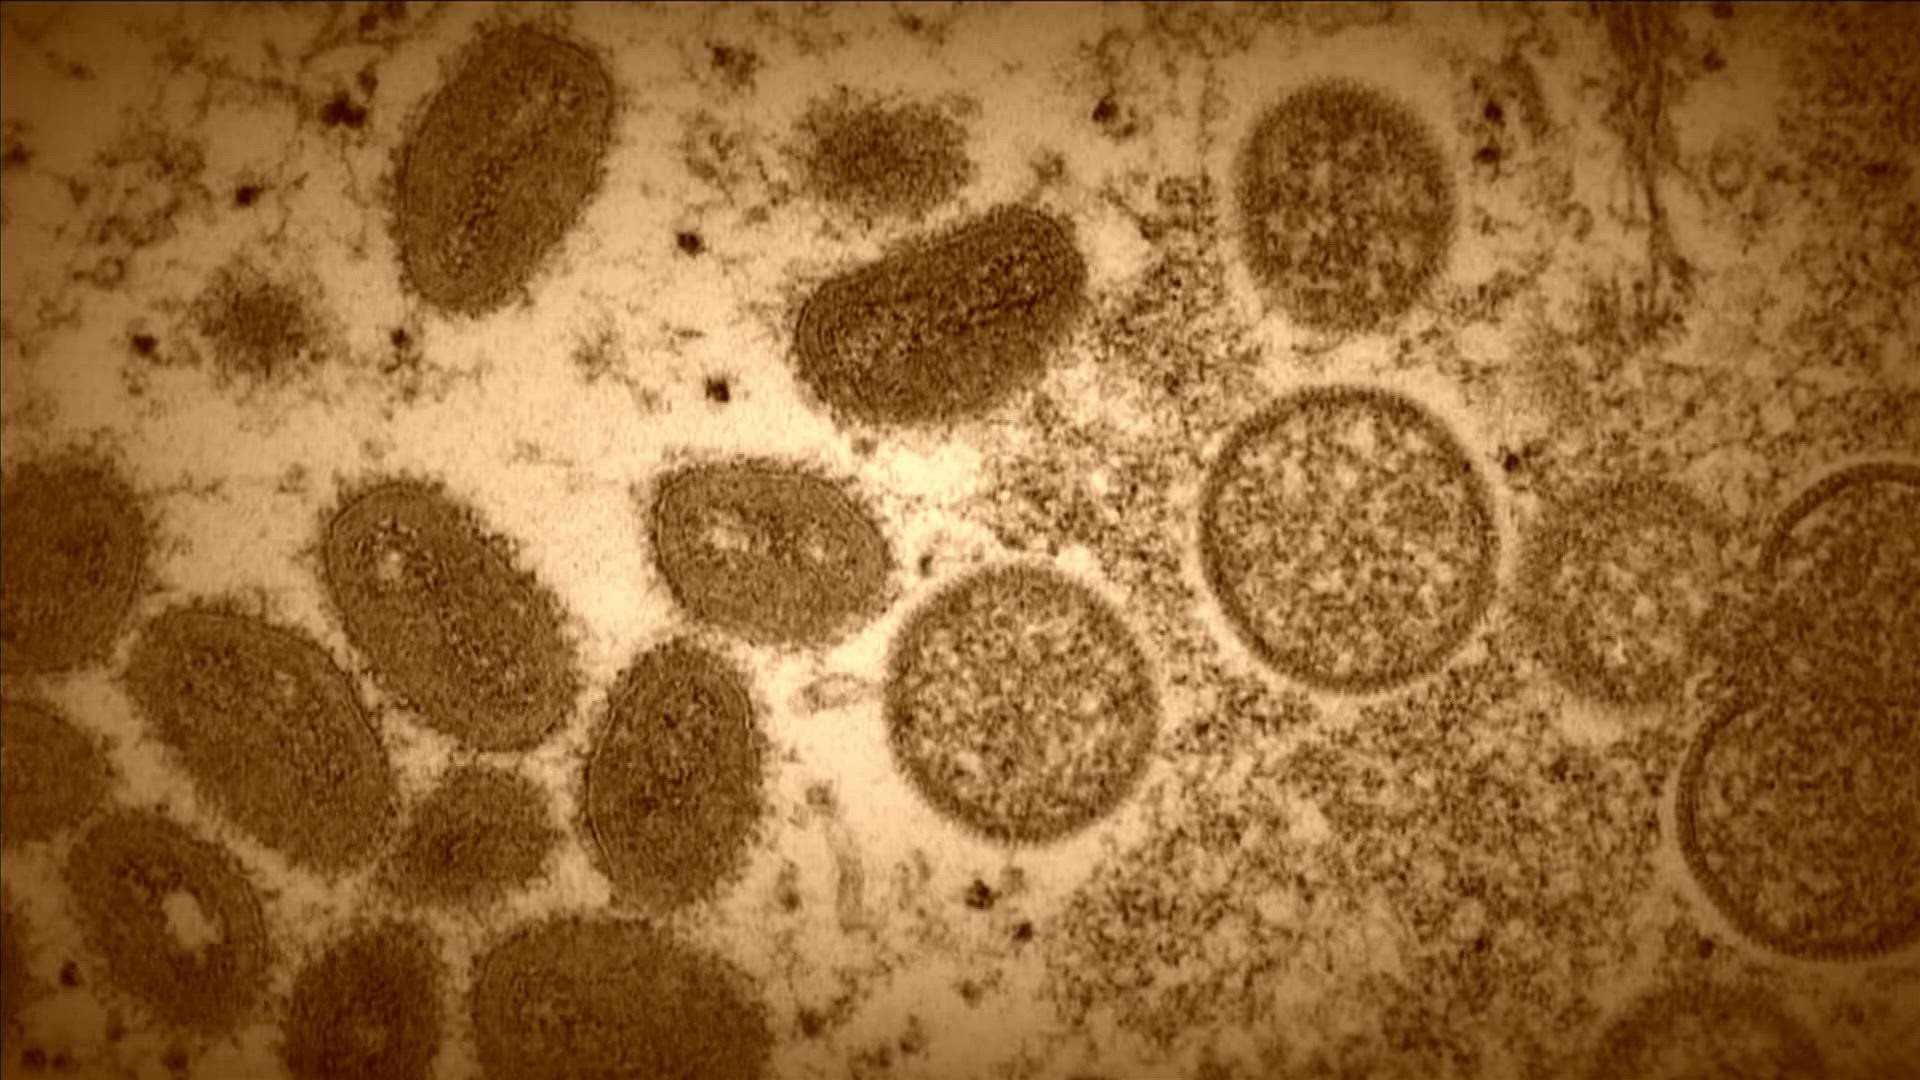 With more communities declaring health emergencies due to monkeypox, we wanted to know what Shelby County residents could do to fight the disease.